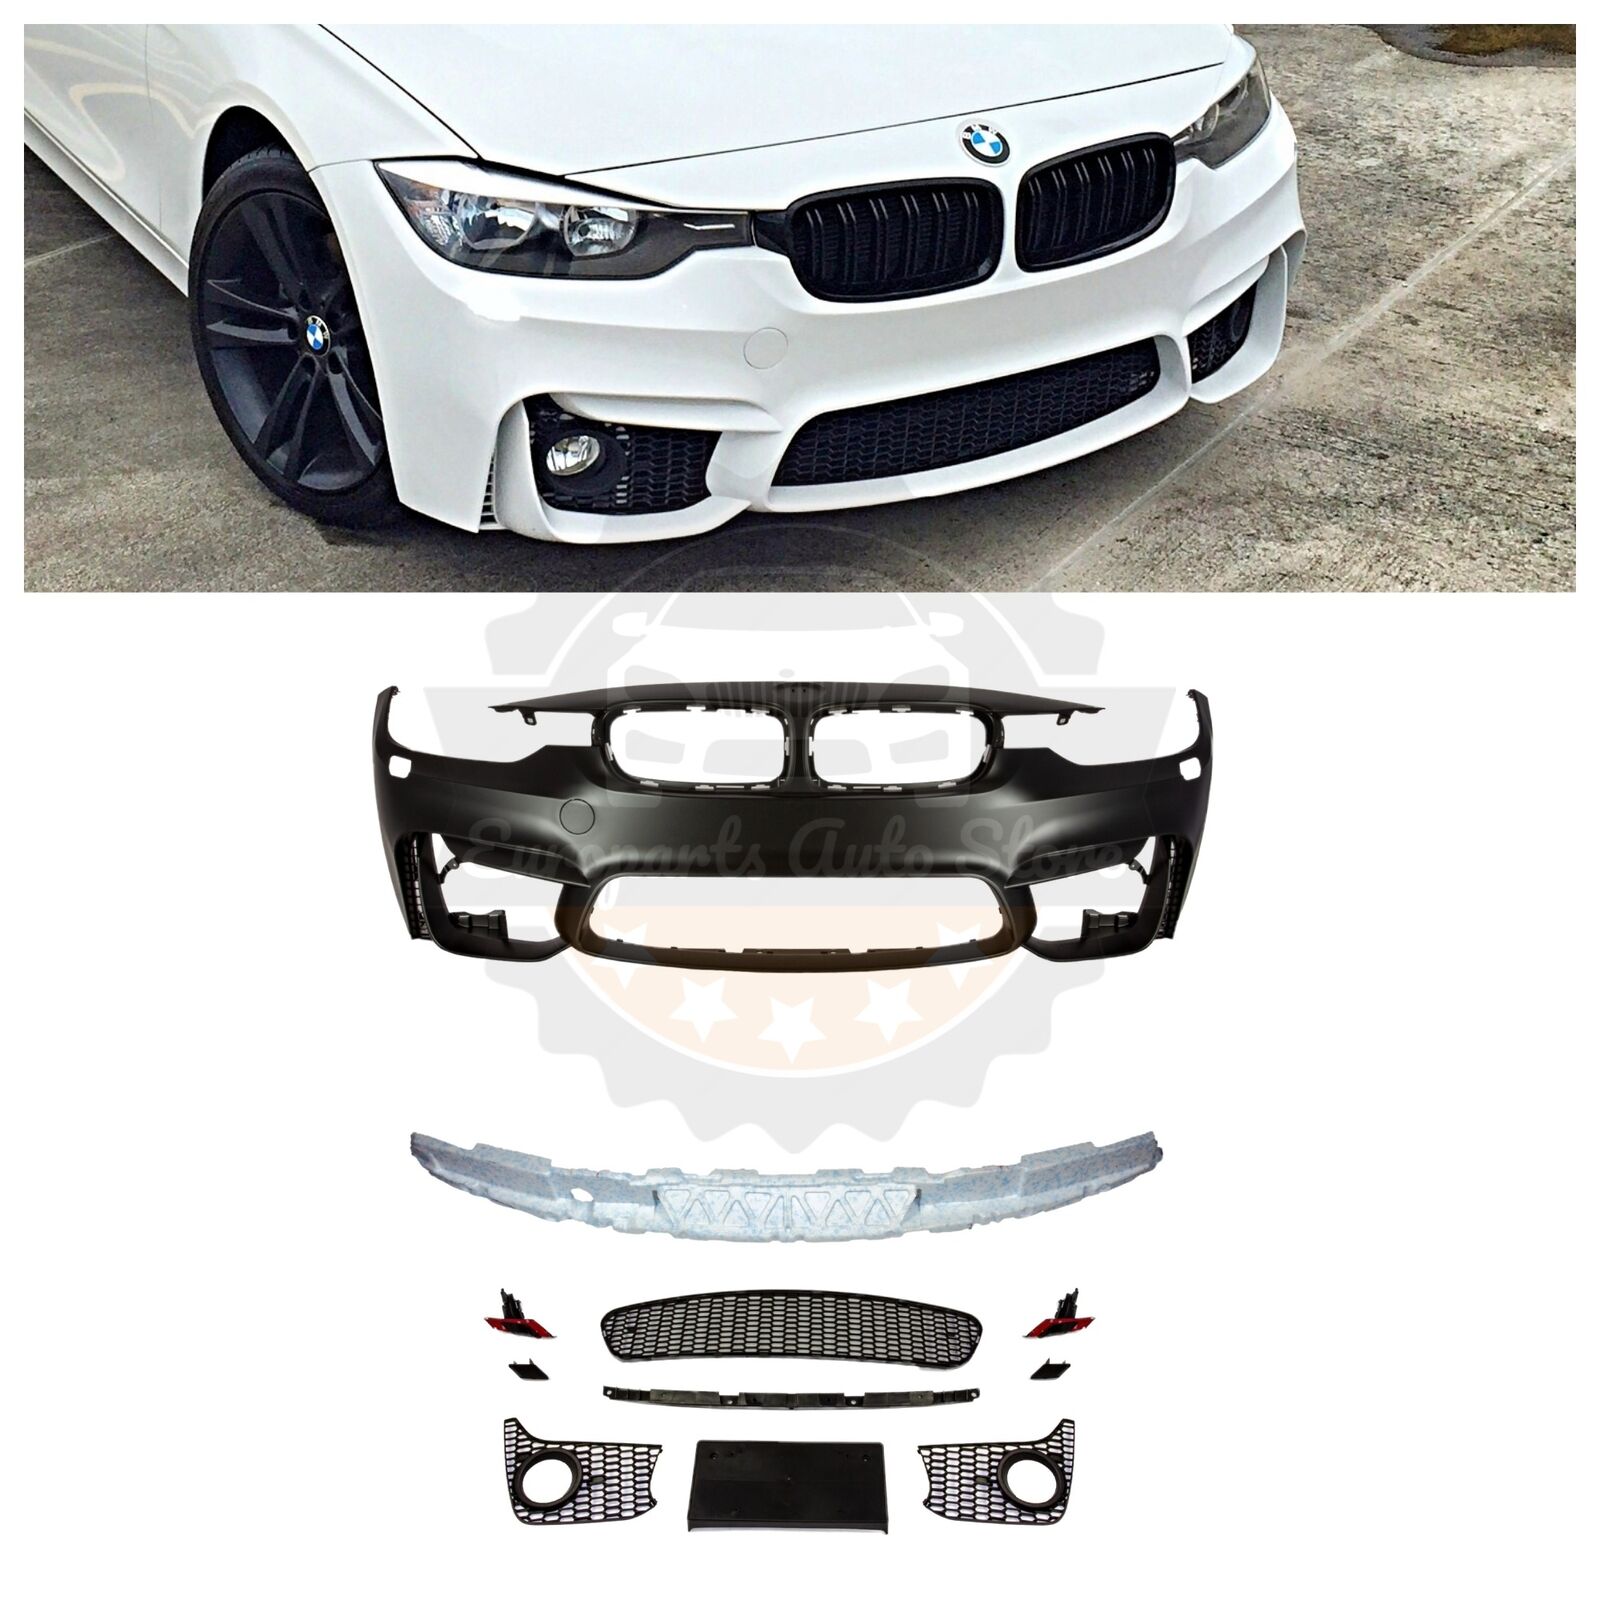 2012-18 F80 M3 STYLE FRONT BUMPER FOR BMW F30 F31 3 SERIES SEDAN WAGON NO PDC